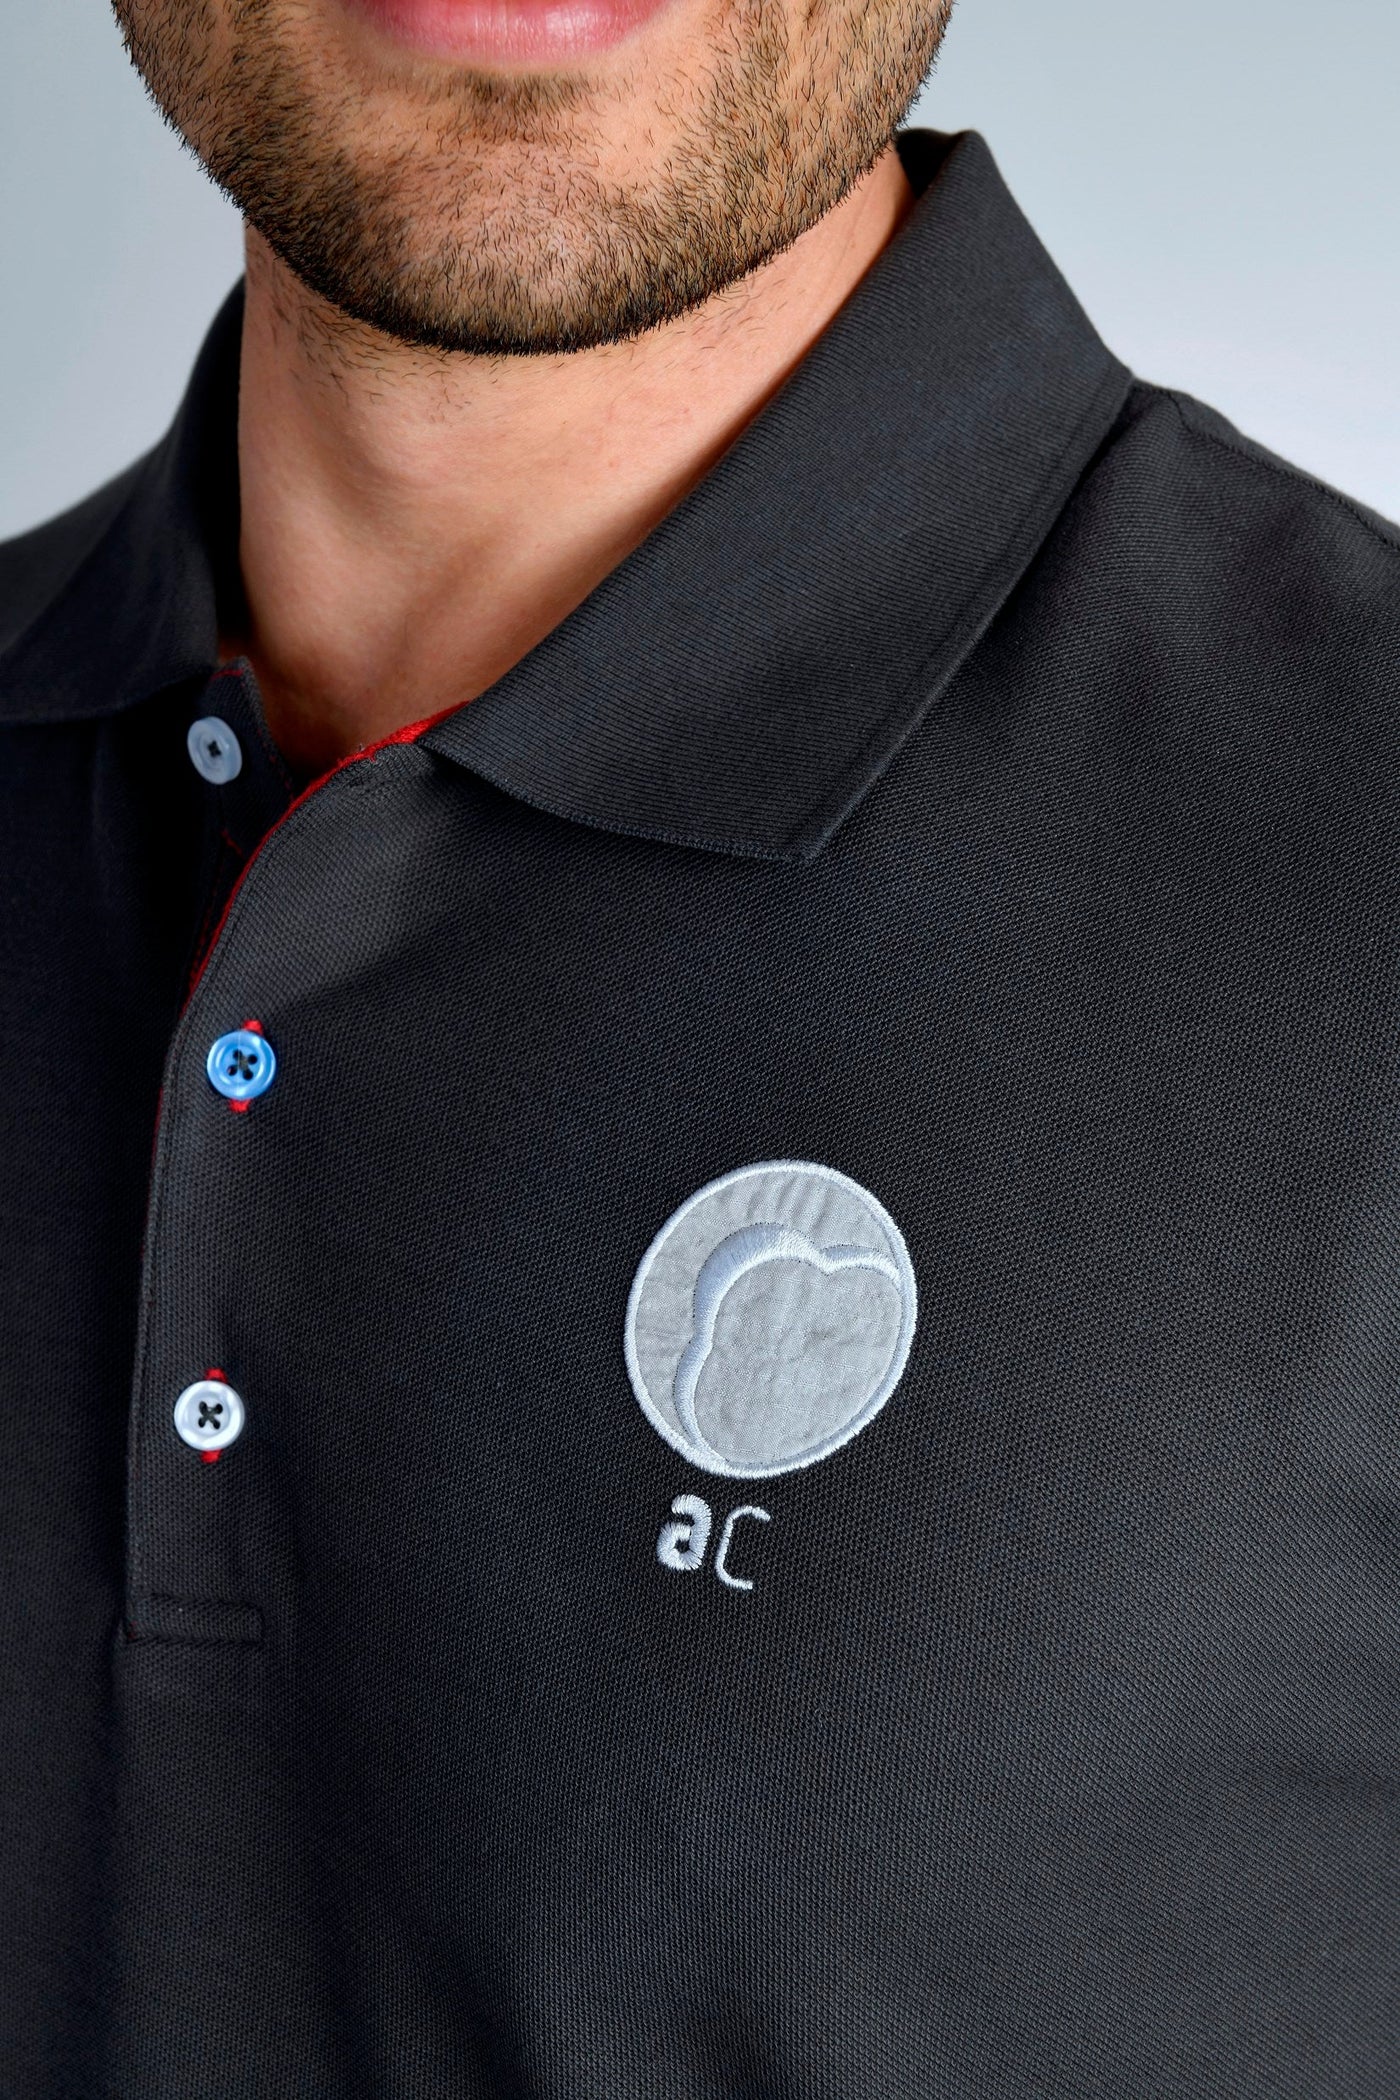 Polo Shirt from our "Artifactcloud" apparel collection. With flown swatch of beta cloth as part of the sticked 'AC' logo.